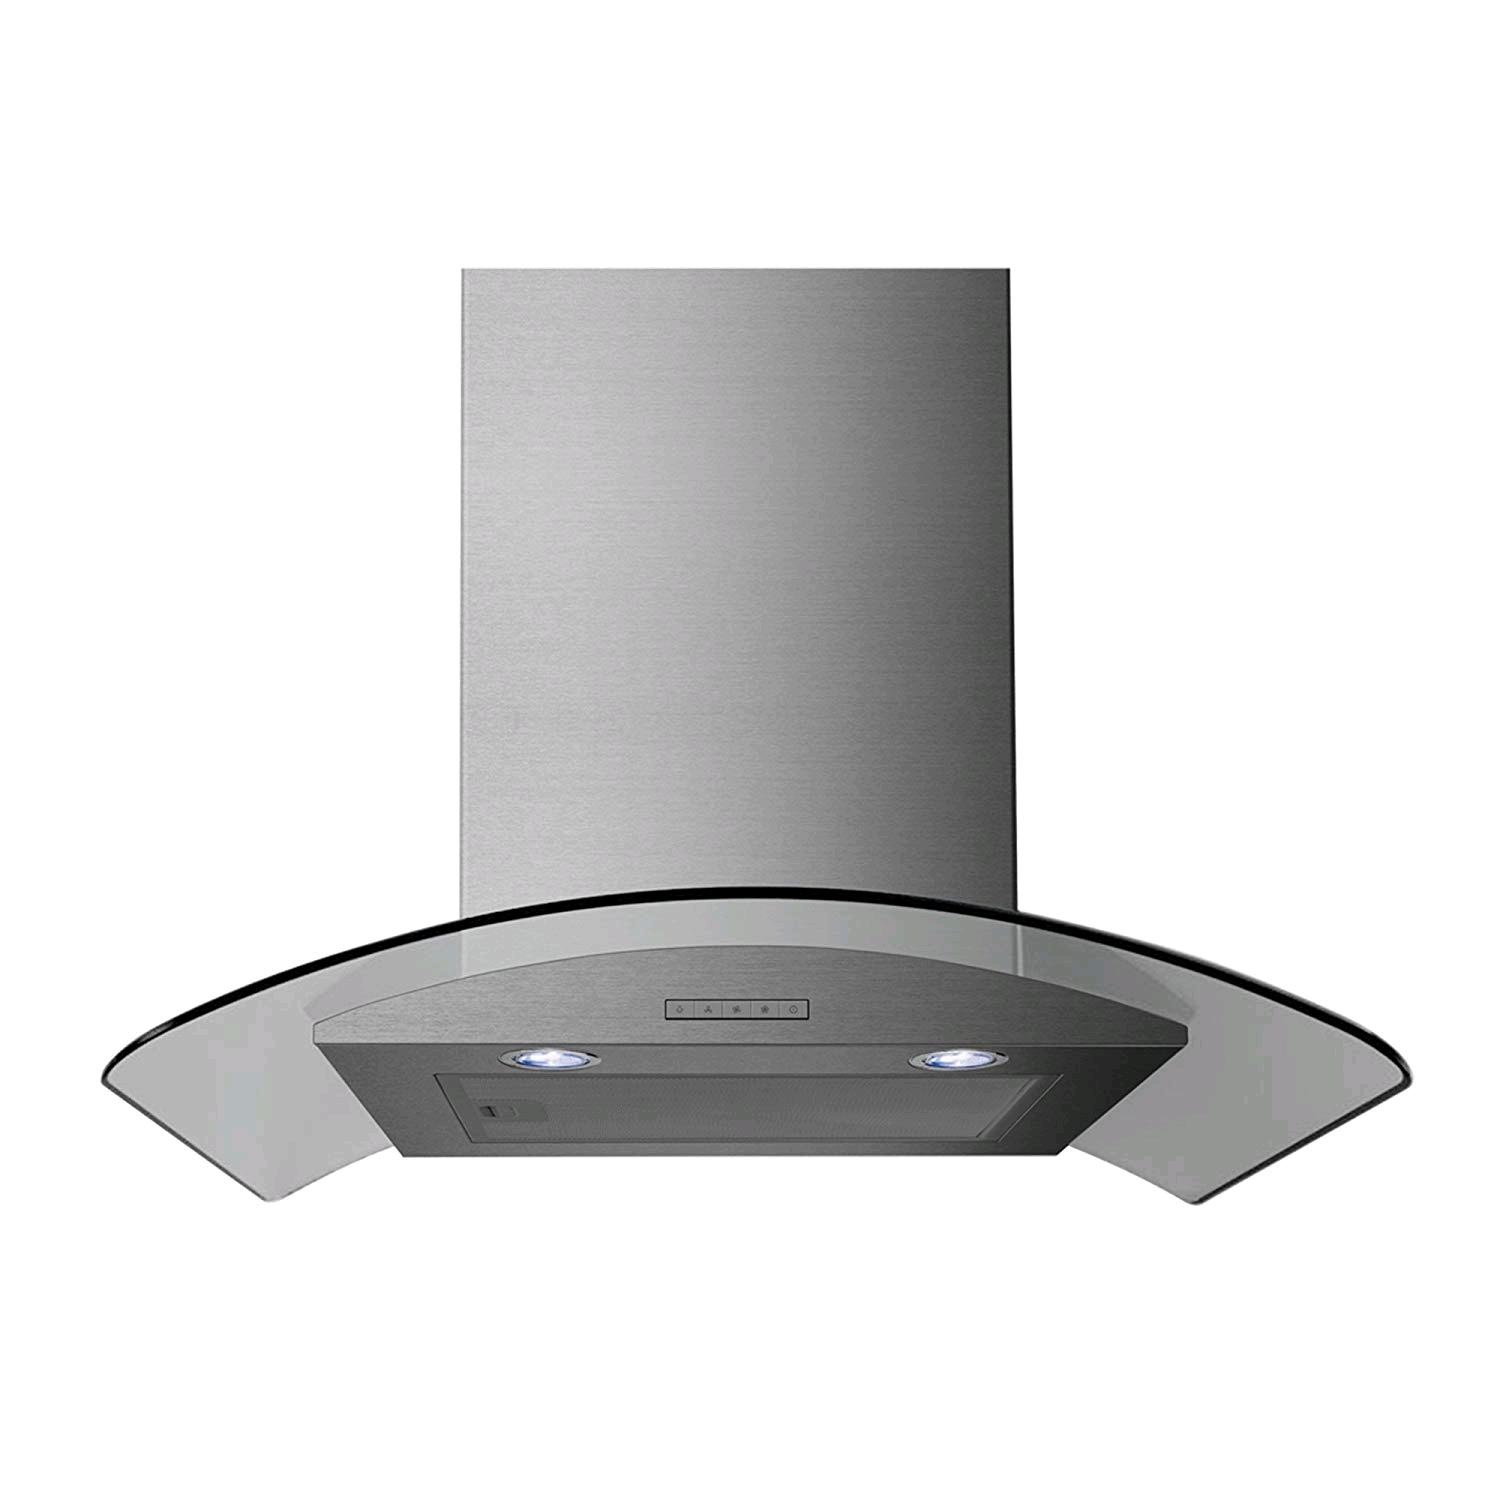 Statesman 60cm Curved Glass Chimmney Hood Stainless Steel 2 LED Lights 3 Speeds Aluminium Grease Filter 